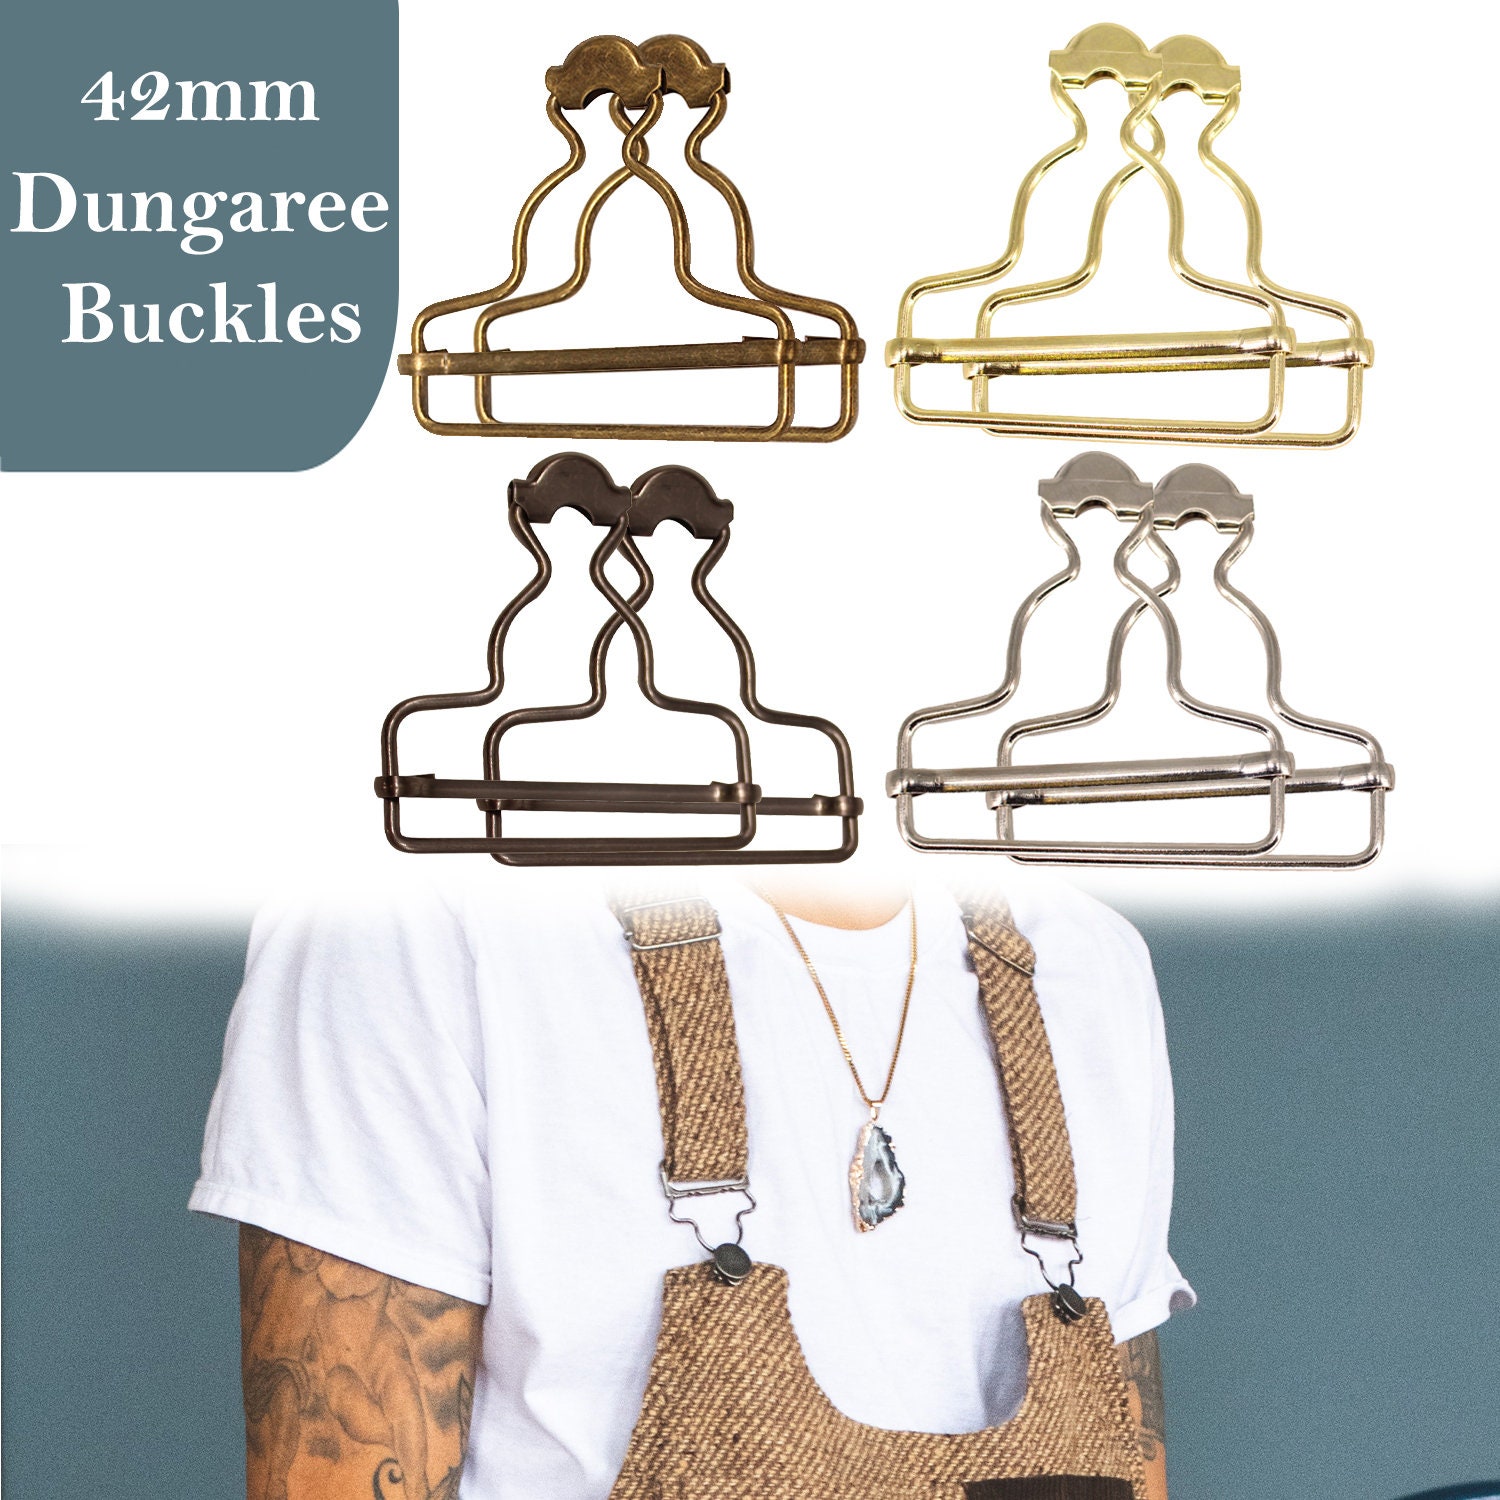 RONCHEN 8pcs Overall Buckles Retro Suspender Replacement Buckles for Jeans Overalls Bib Pants Trousers (Bronze and Silver